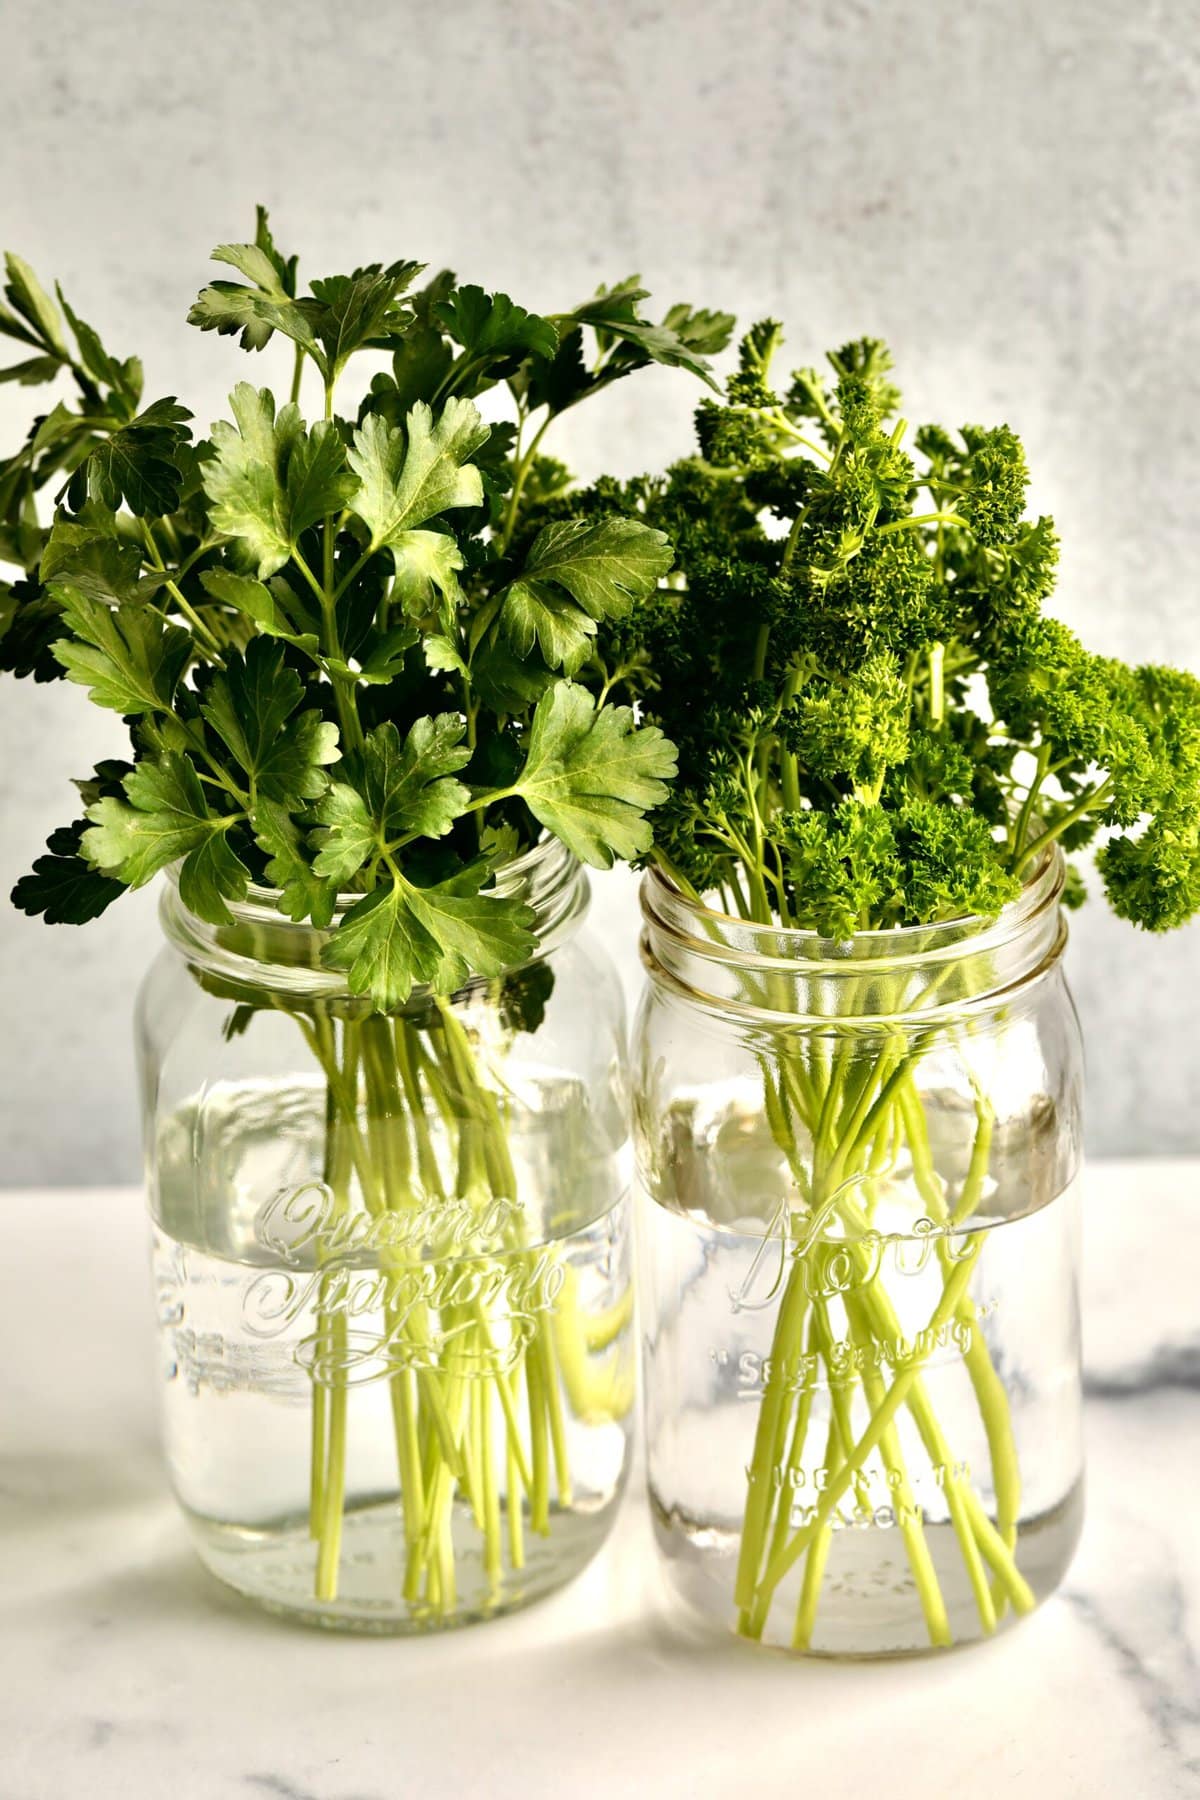 How to store parsley? parsley in jar with water 